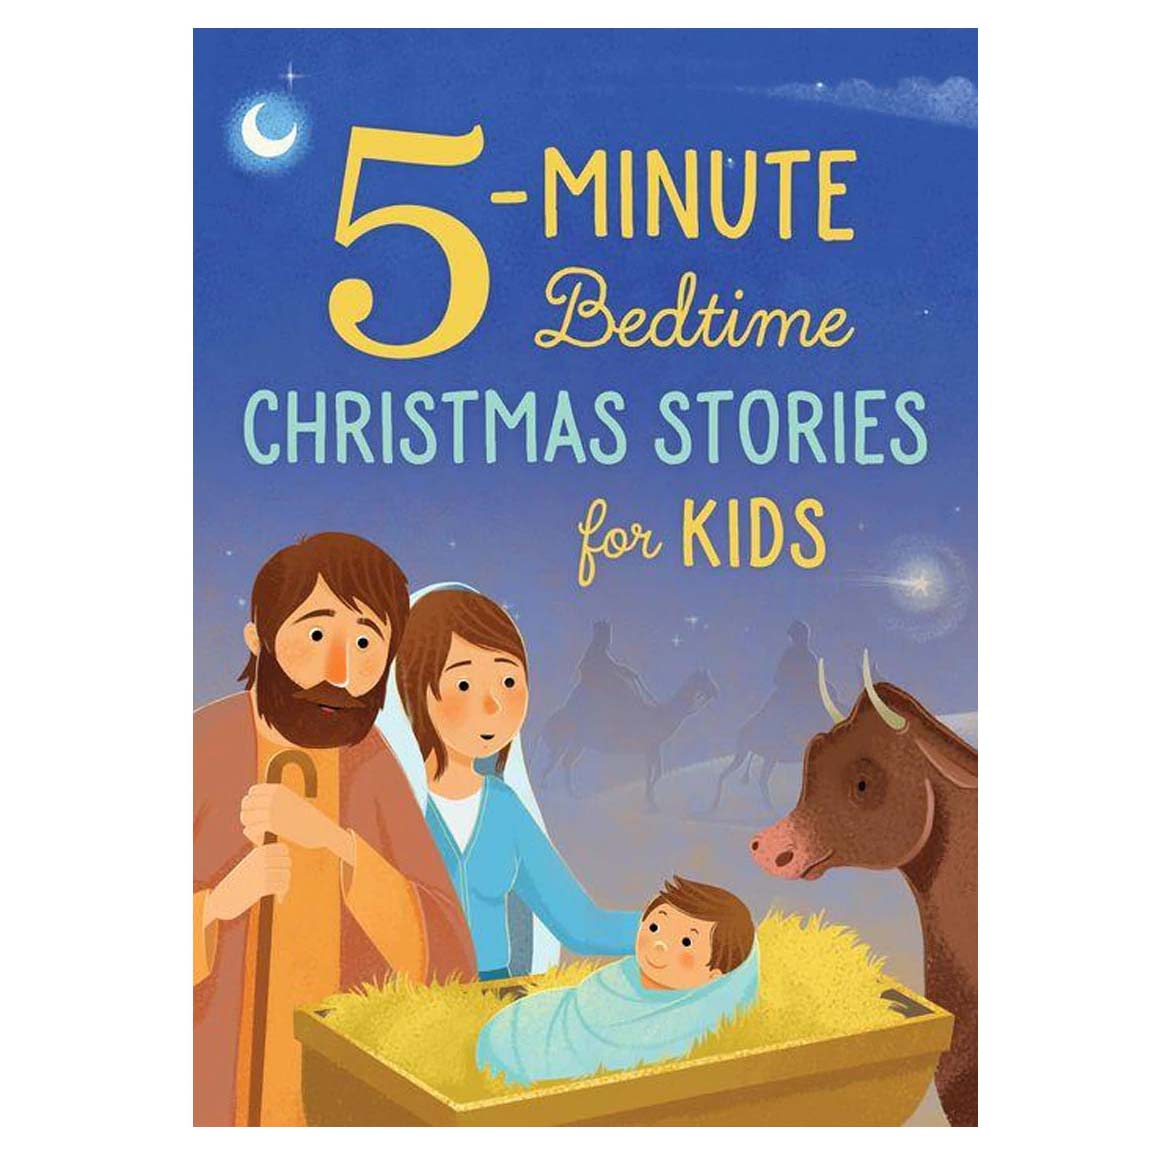 Bedtime Christmas Stories for Kids 5-Minute